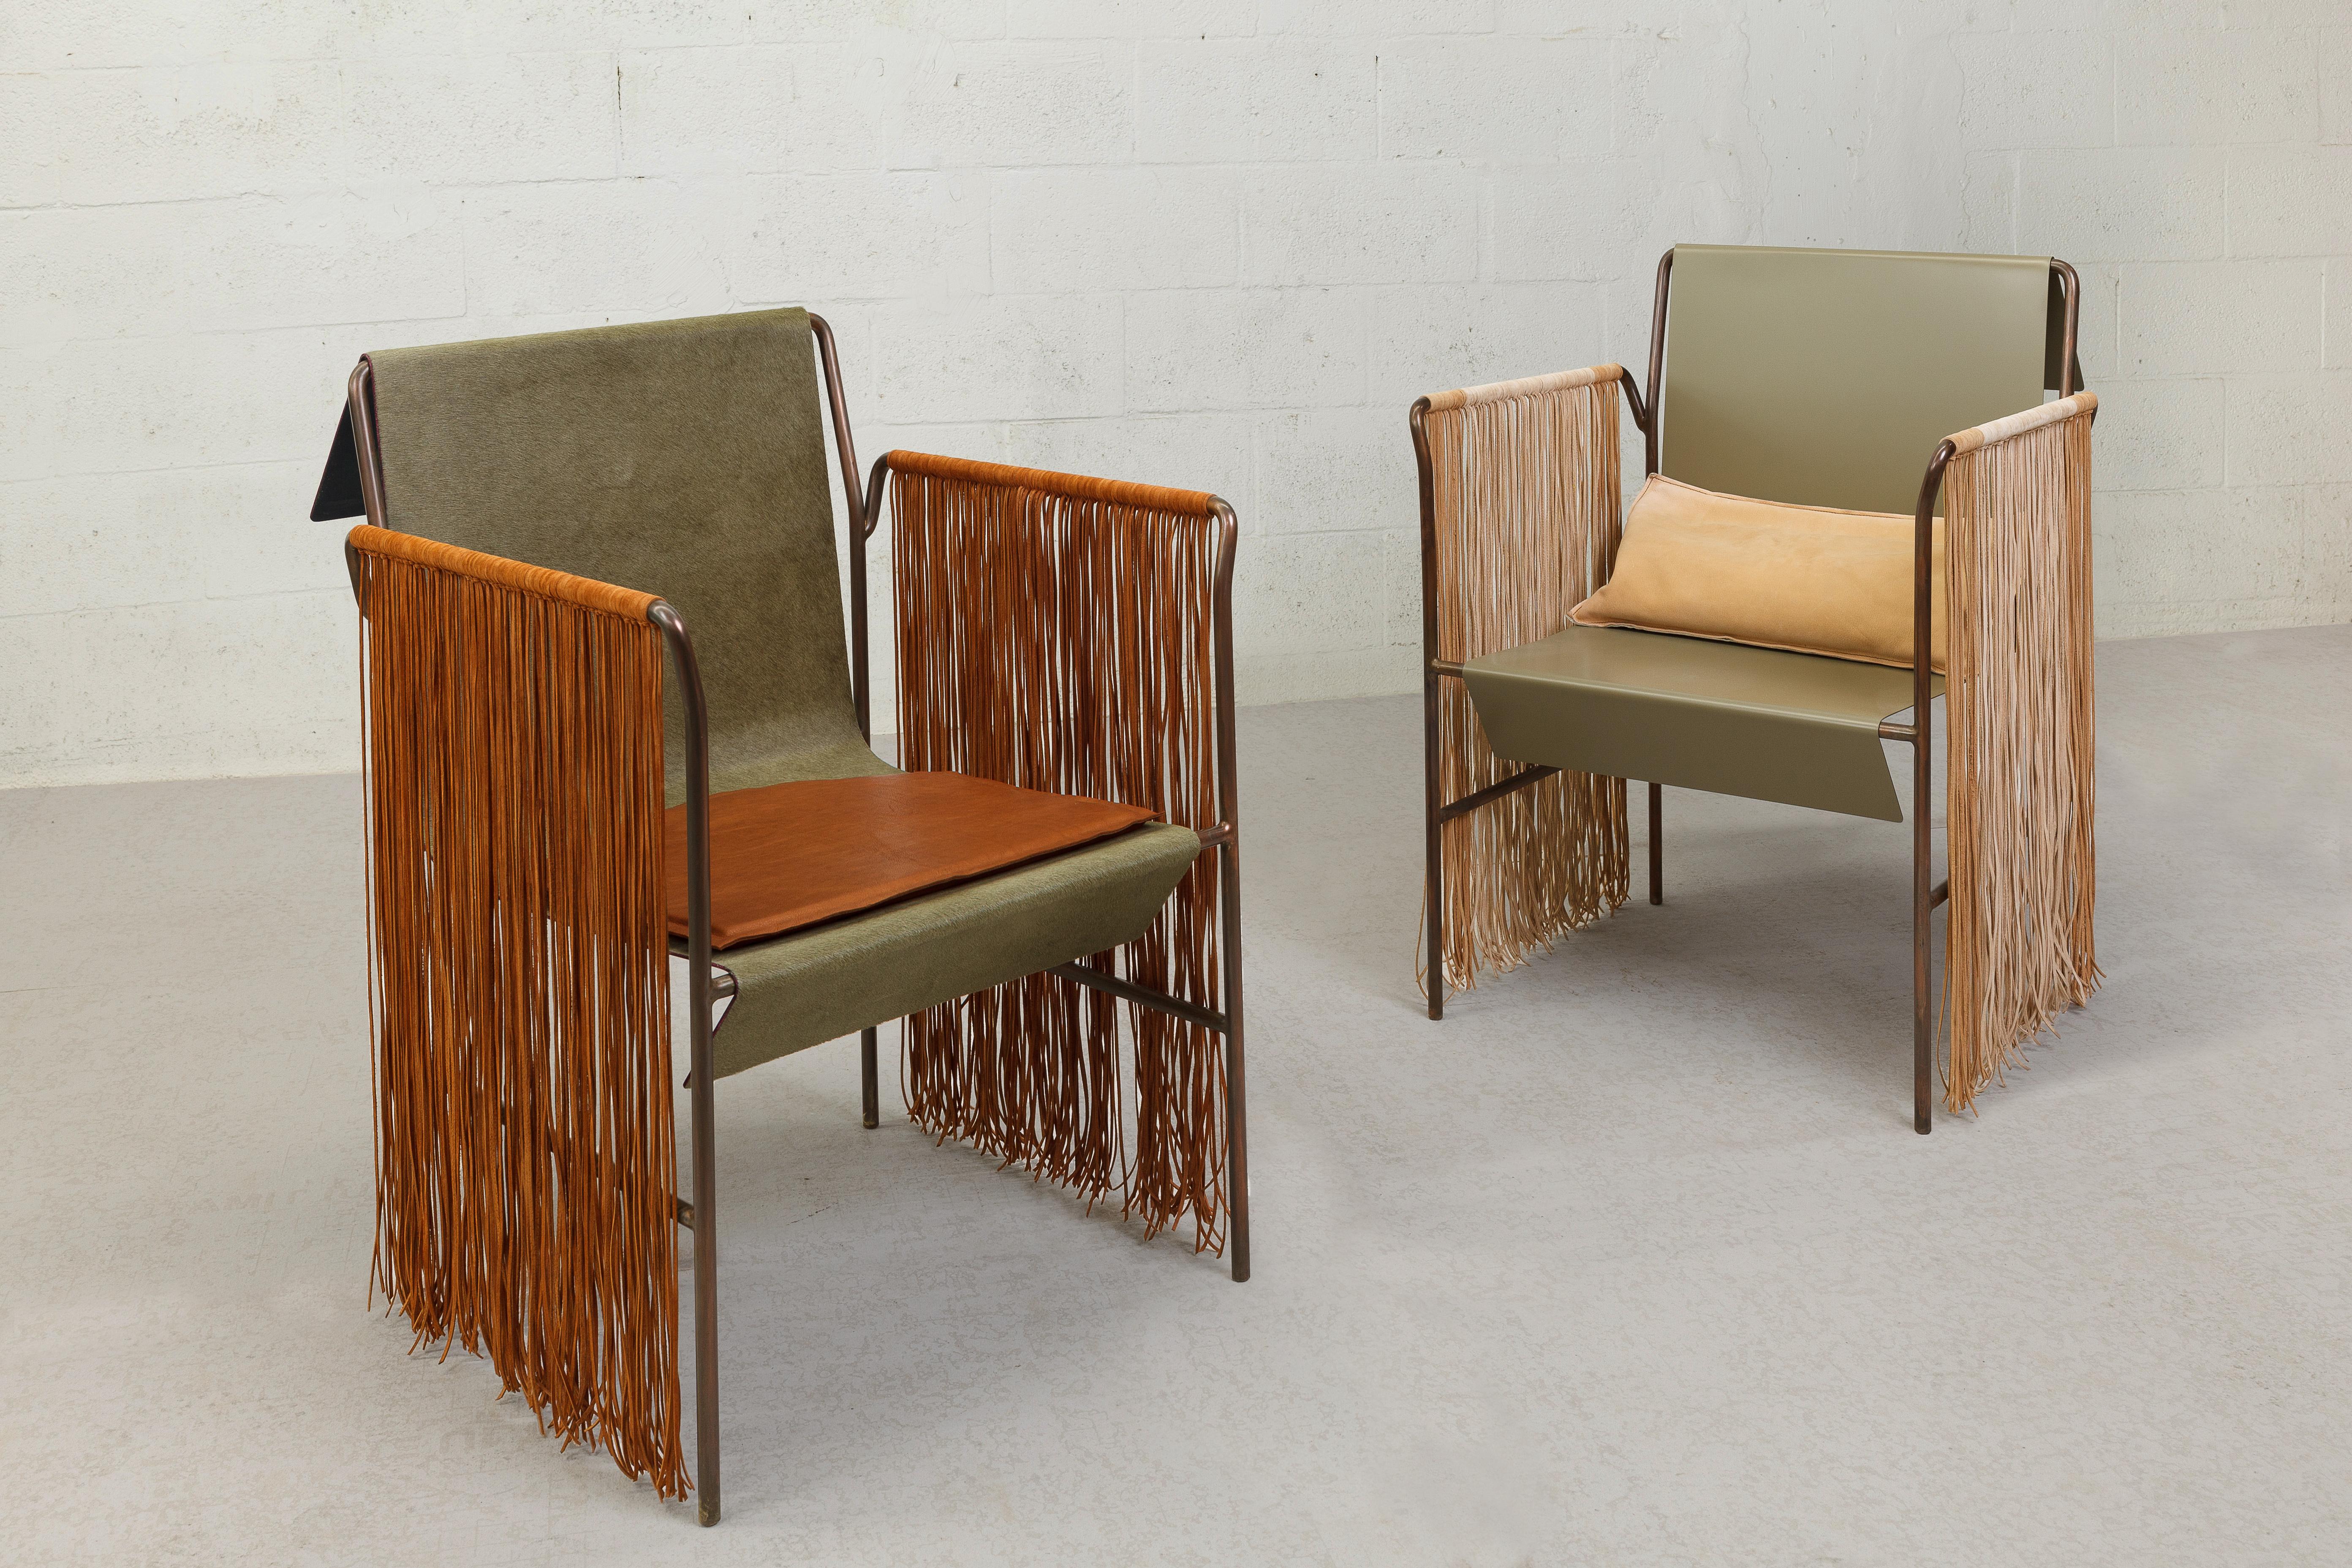 Contemporary Tribal Arm Chair in Patinated Steel and Leather by Vivian Carbonell For Sale 5